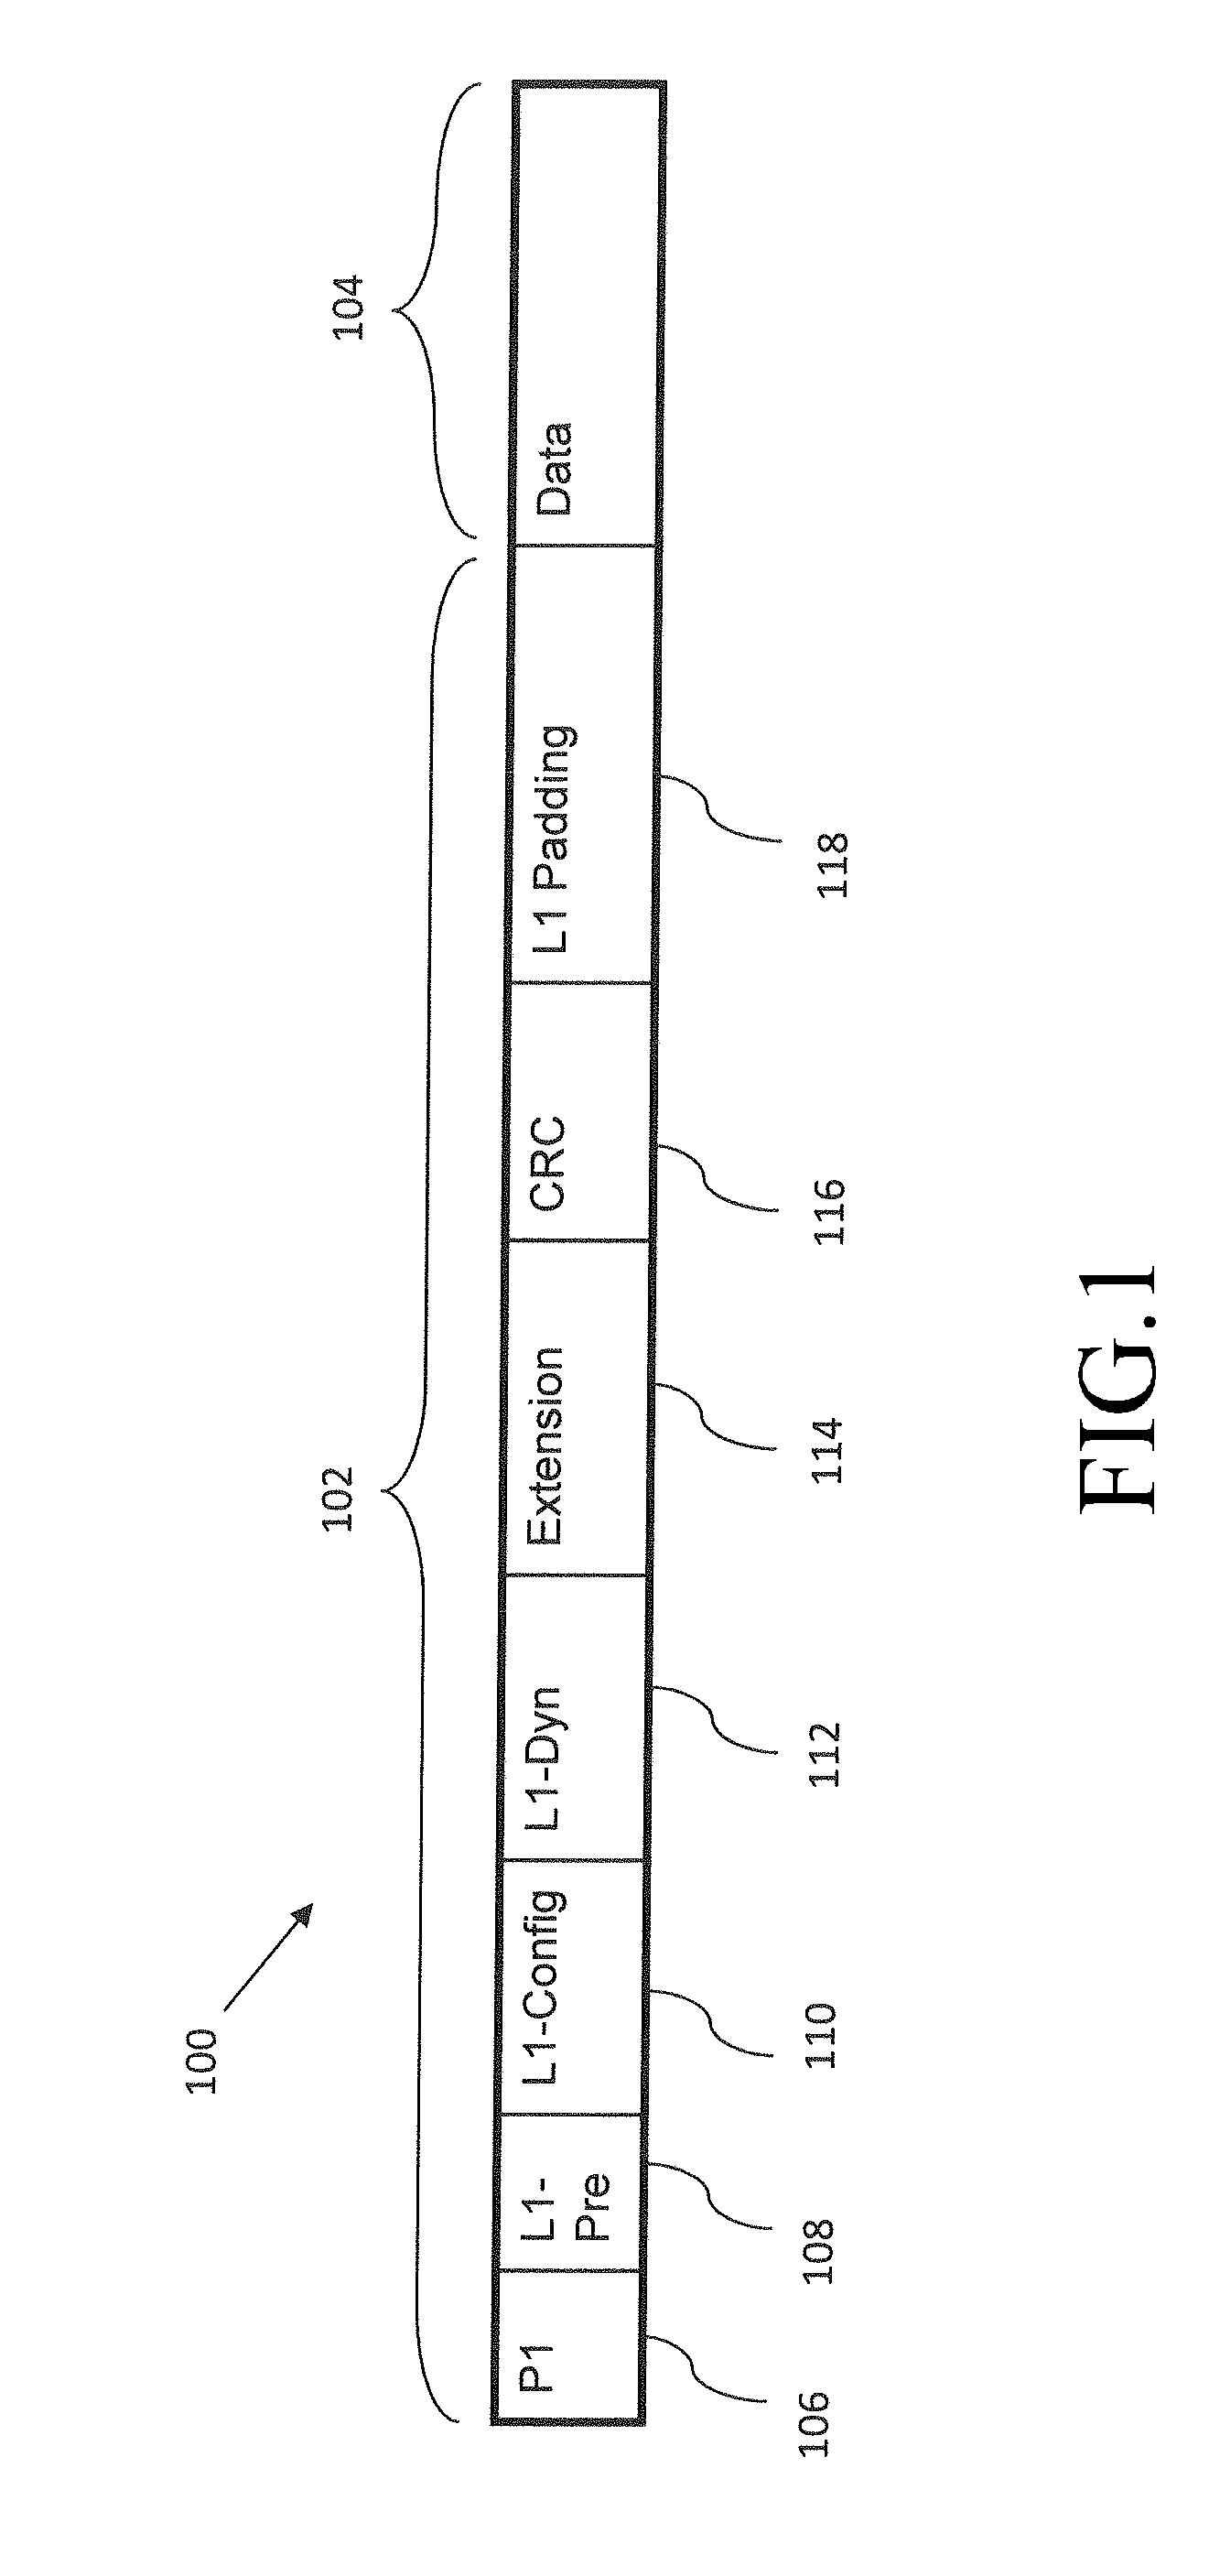 Frame structure of a wireless communication system, and method and apparatus for transmitting and receiving a plurality of data streams through the frame structure